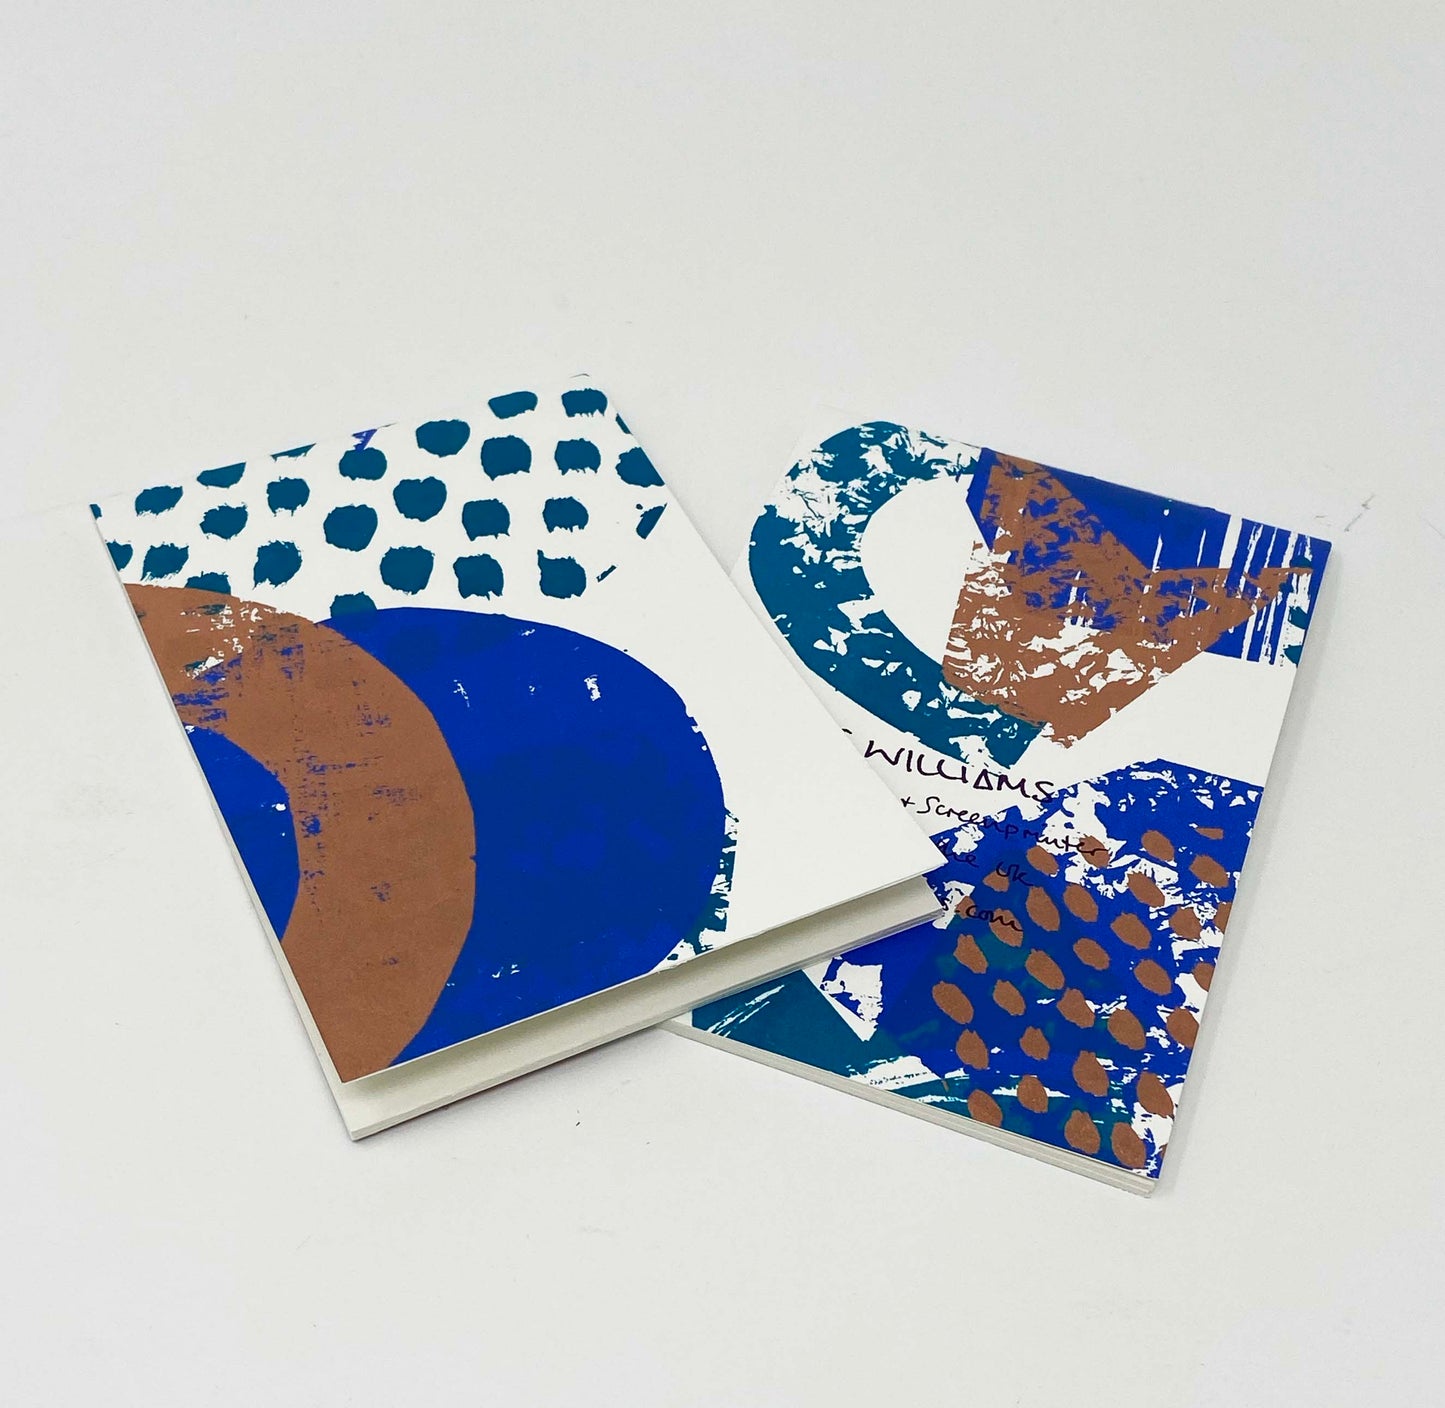 Screen Printed Note Book by Kirstie Williams